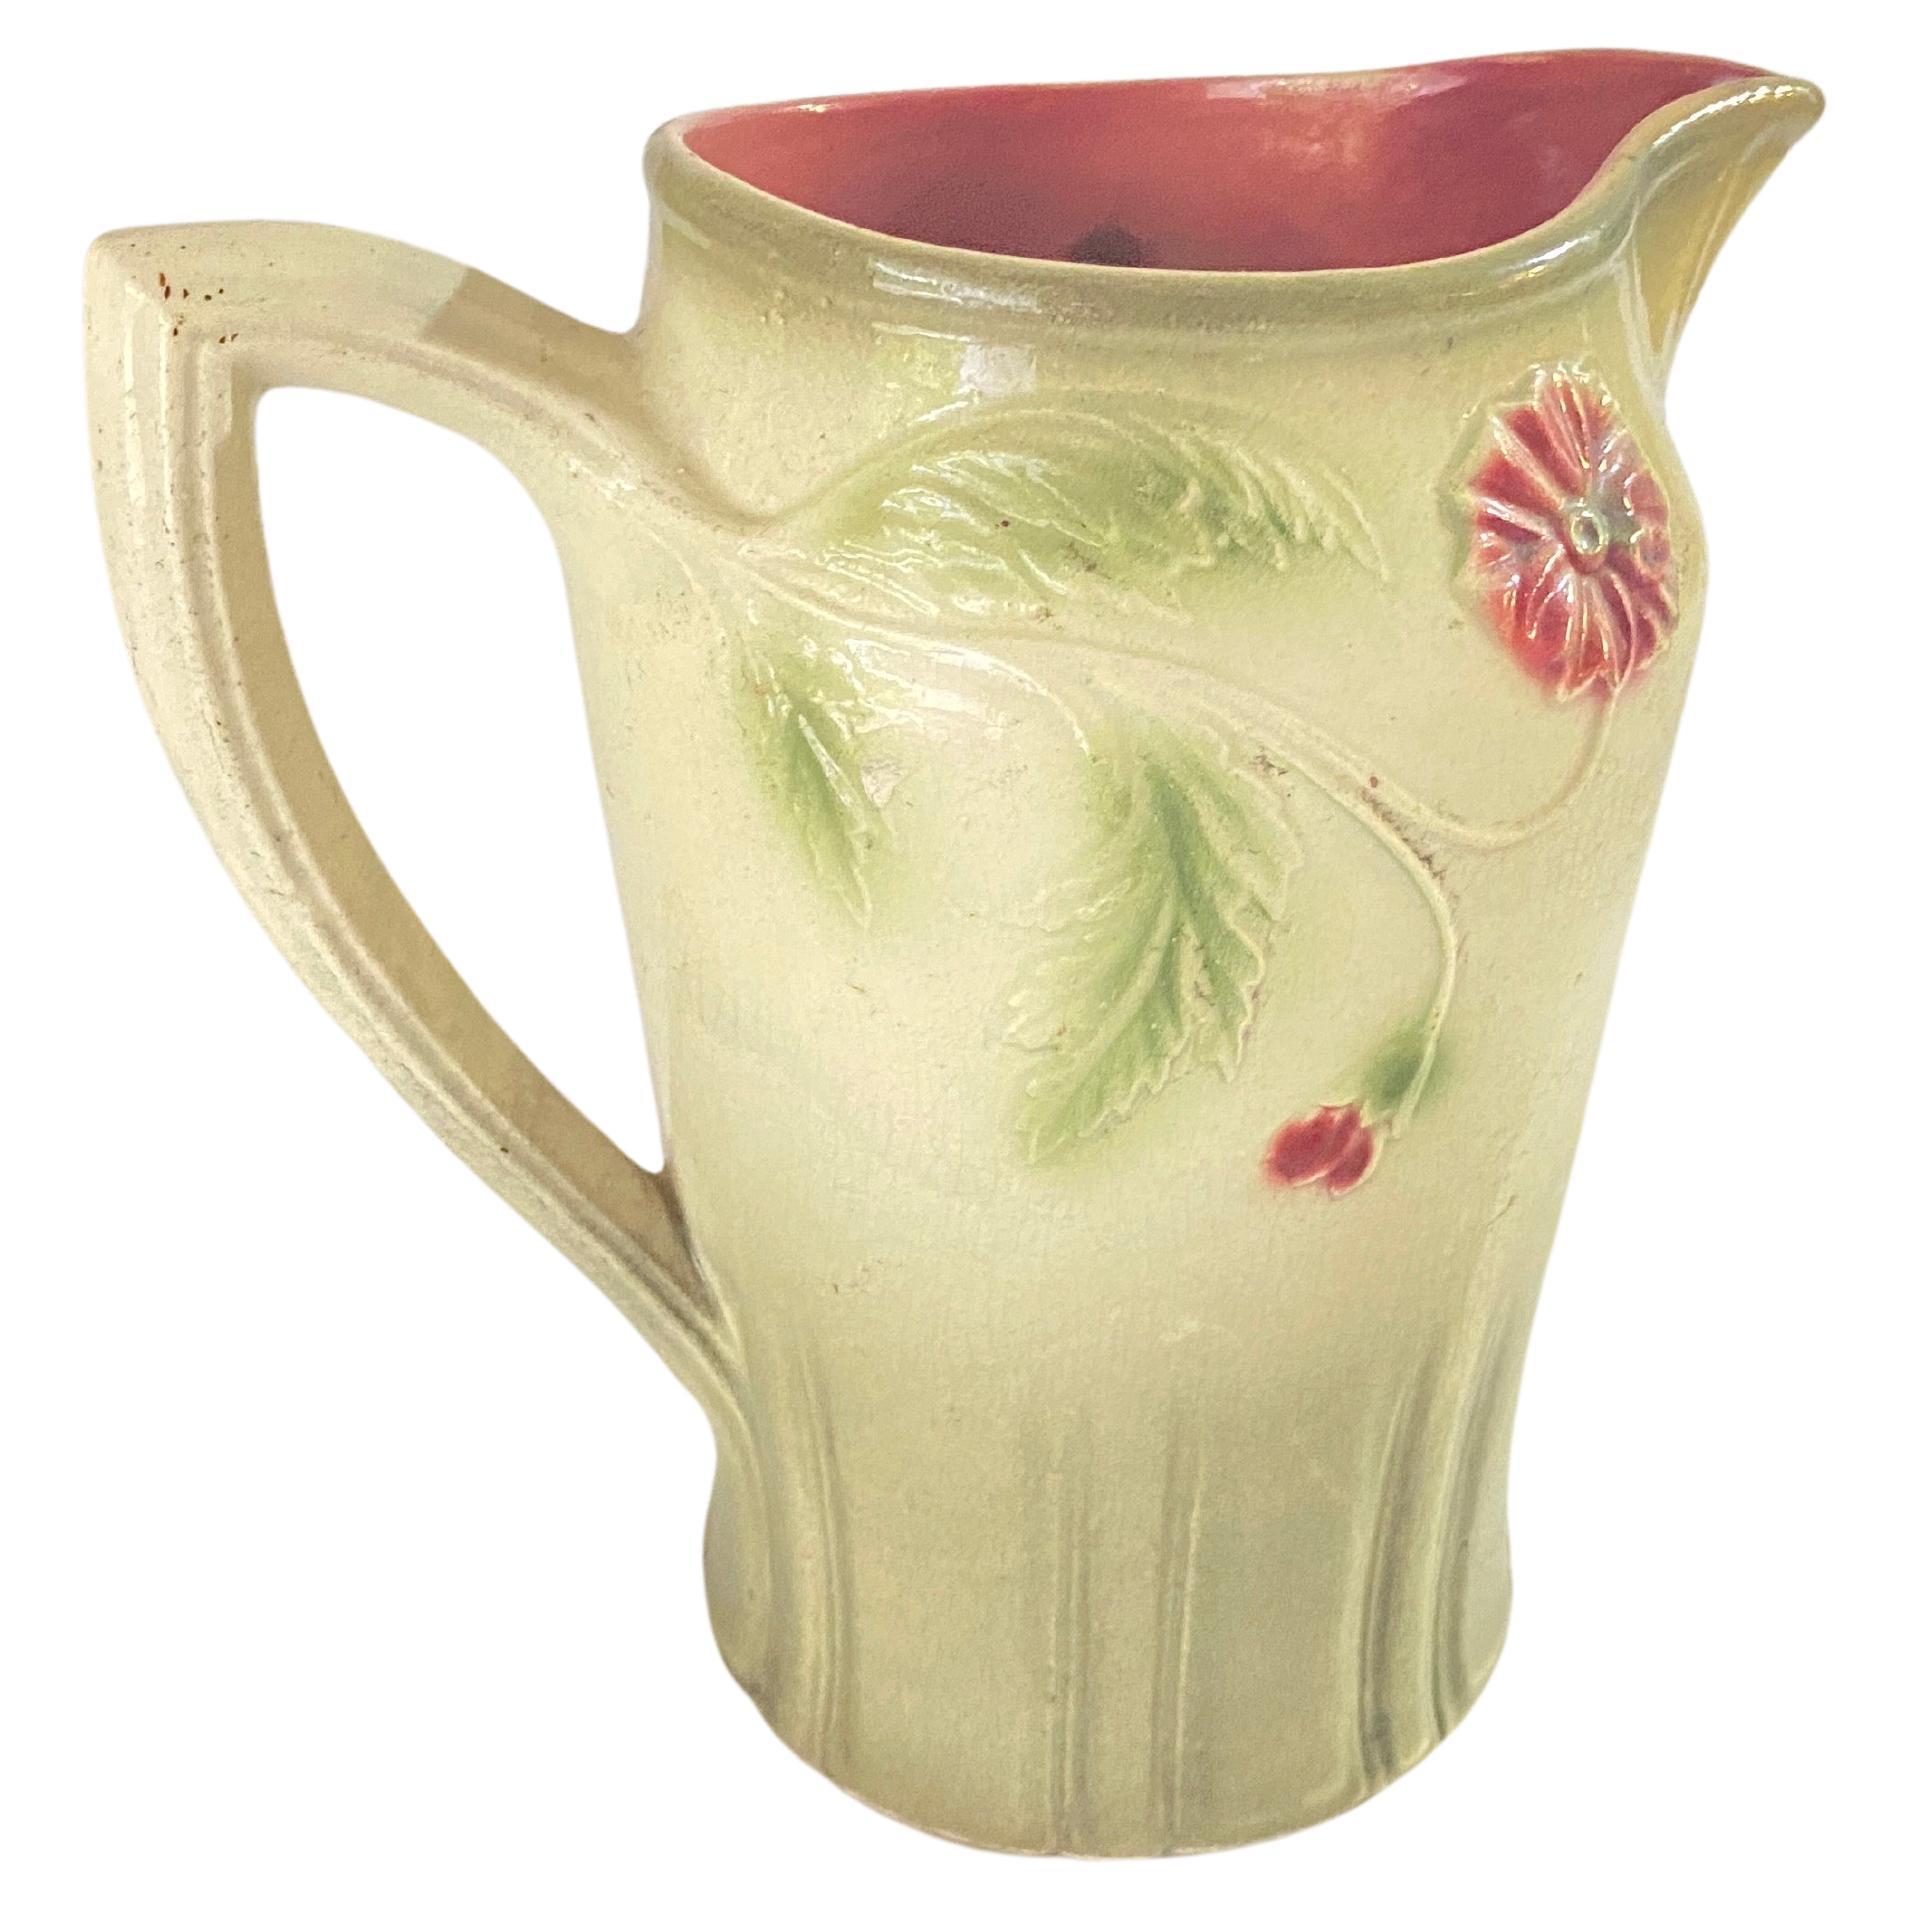 Majolica Pitcher circa 1900 Brown Yellow and Green Colors France